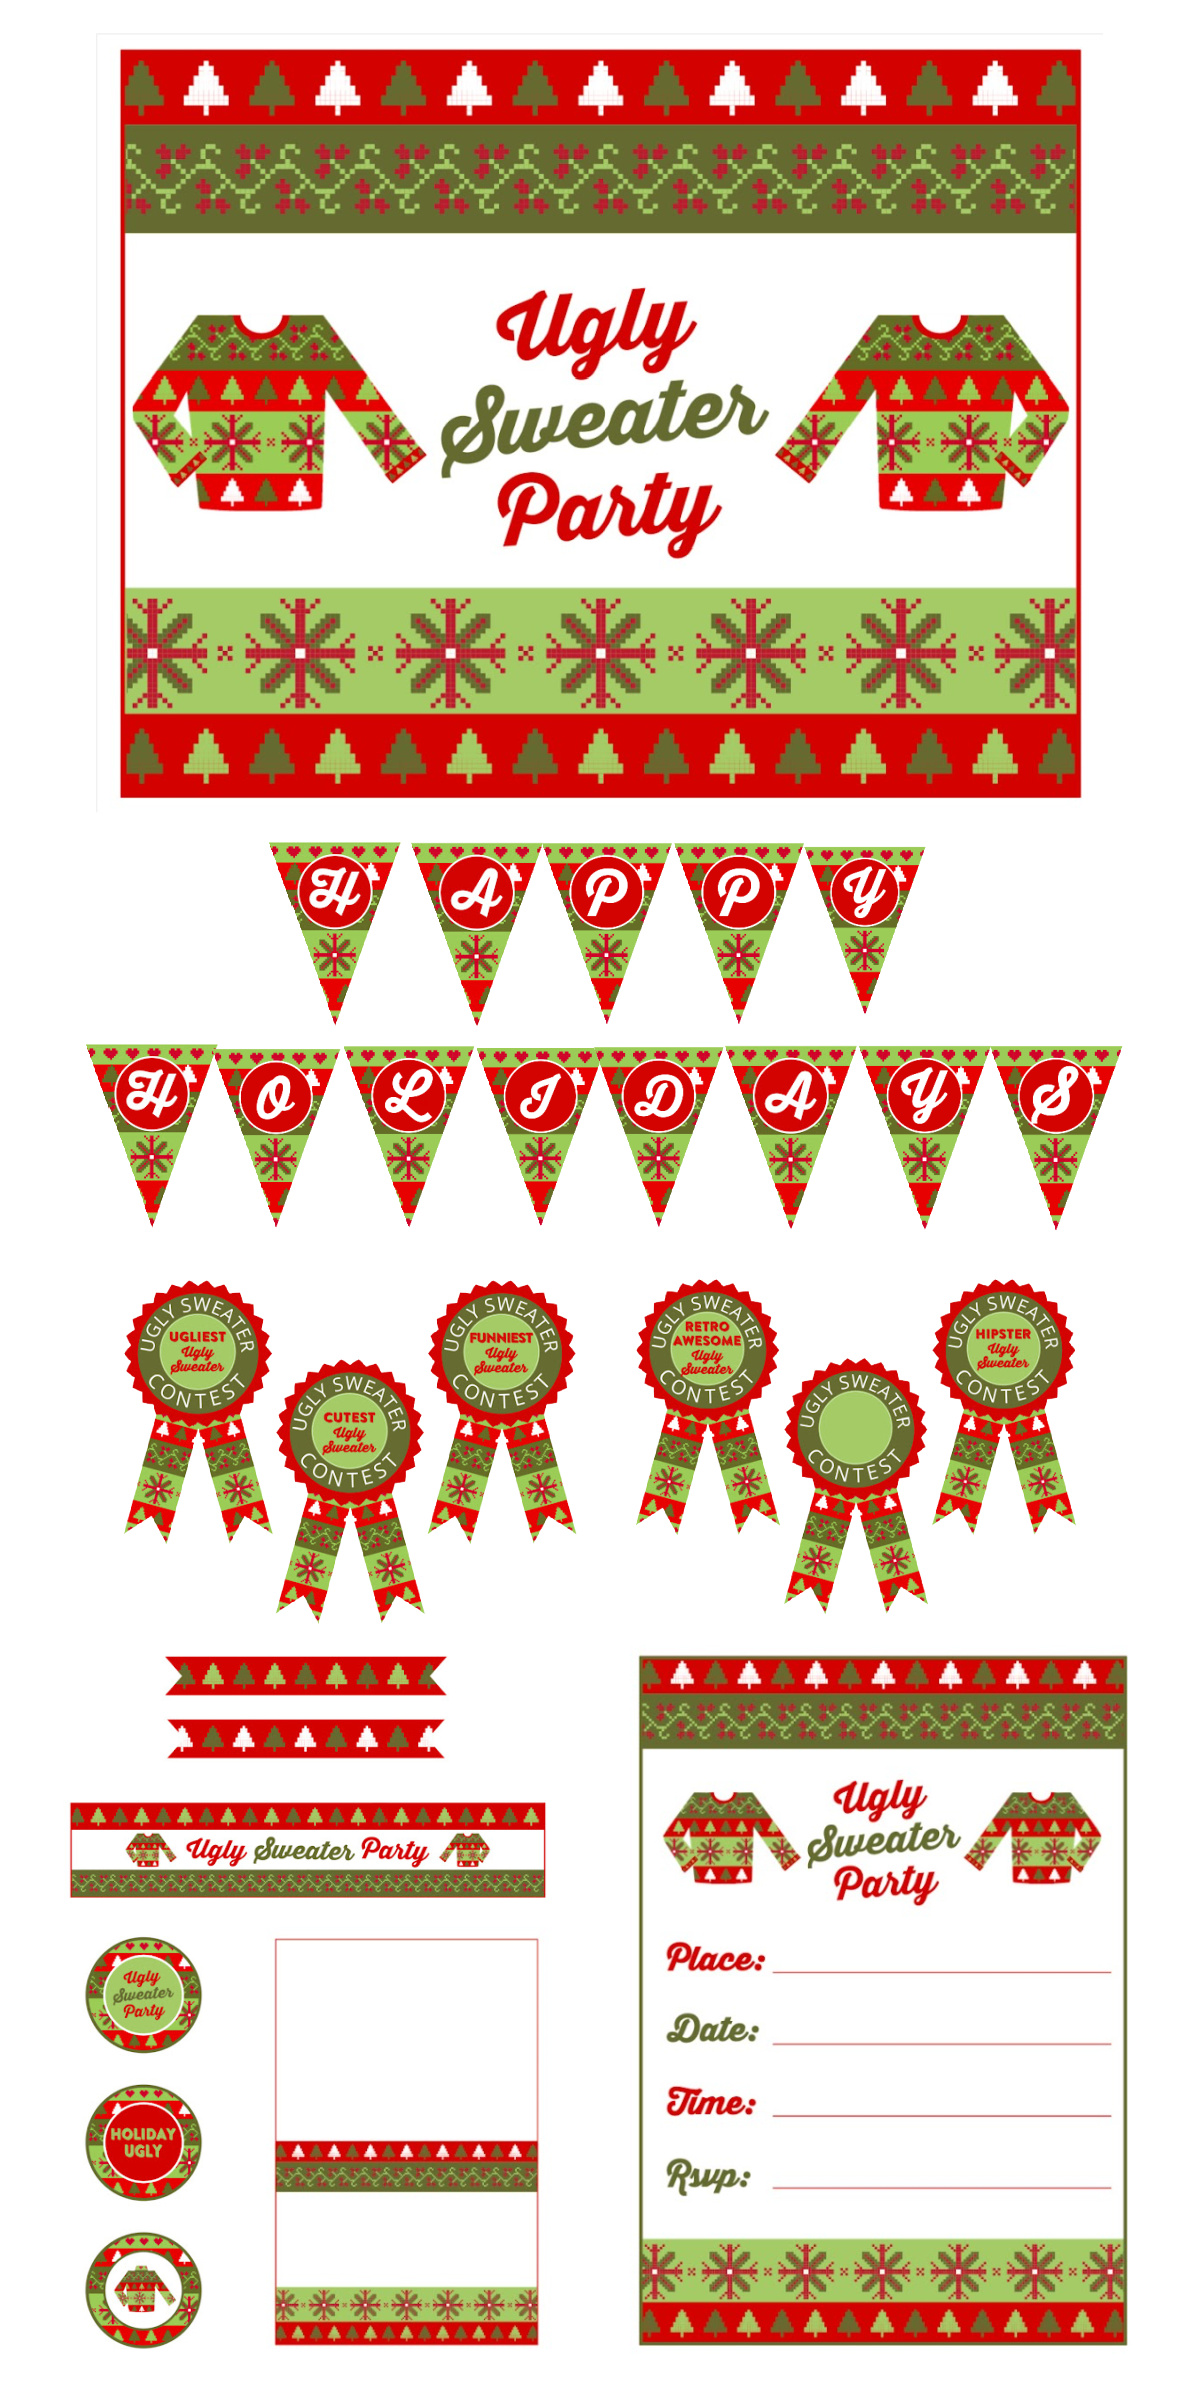 Download these Festive FREE Ugly Sweater Party Printables